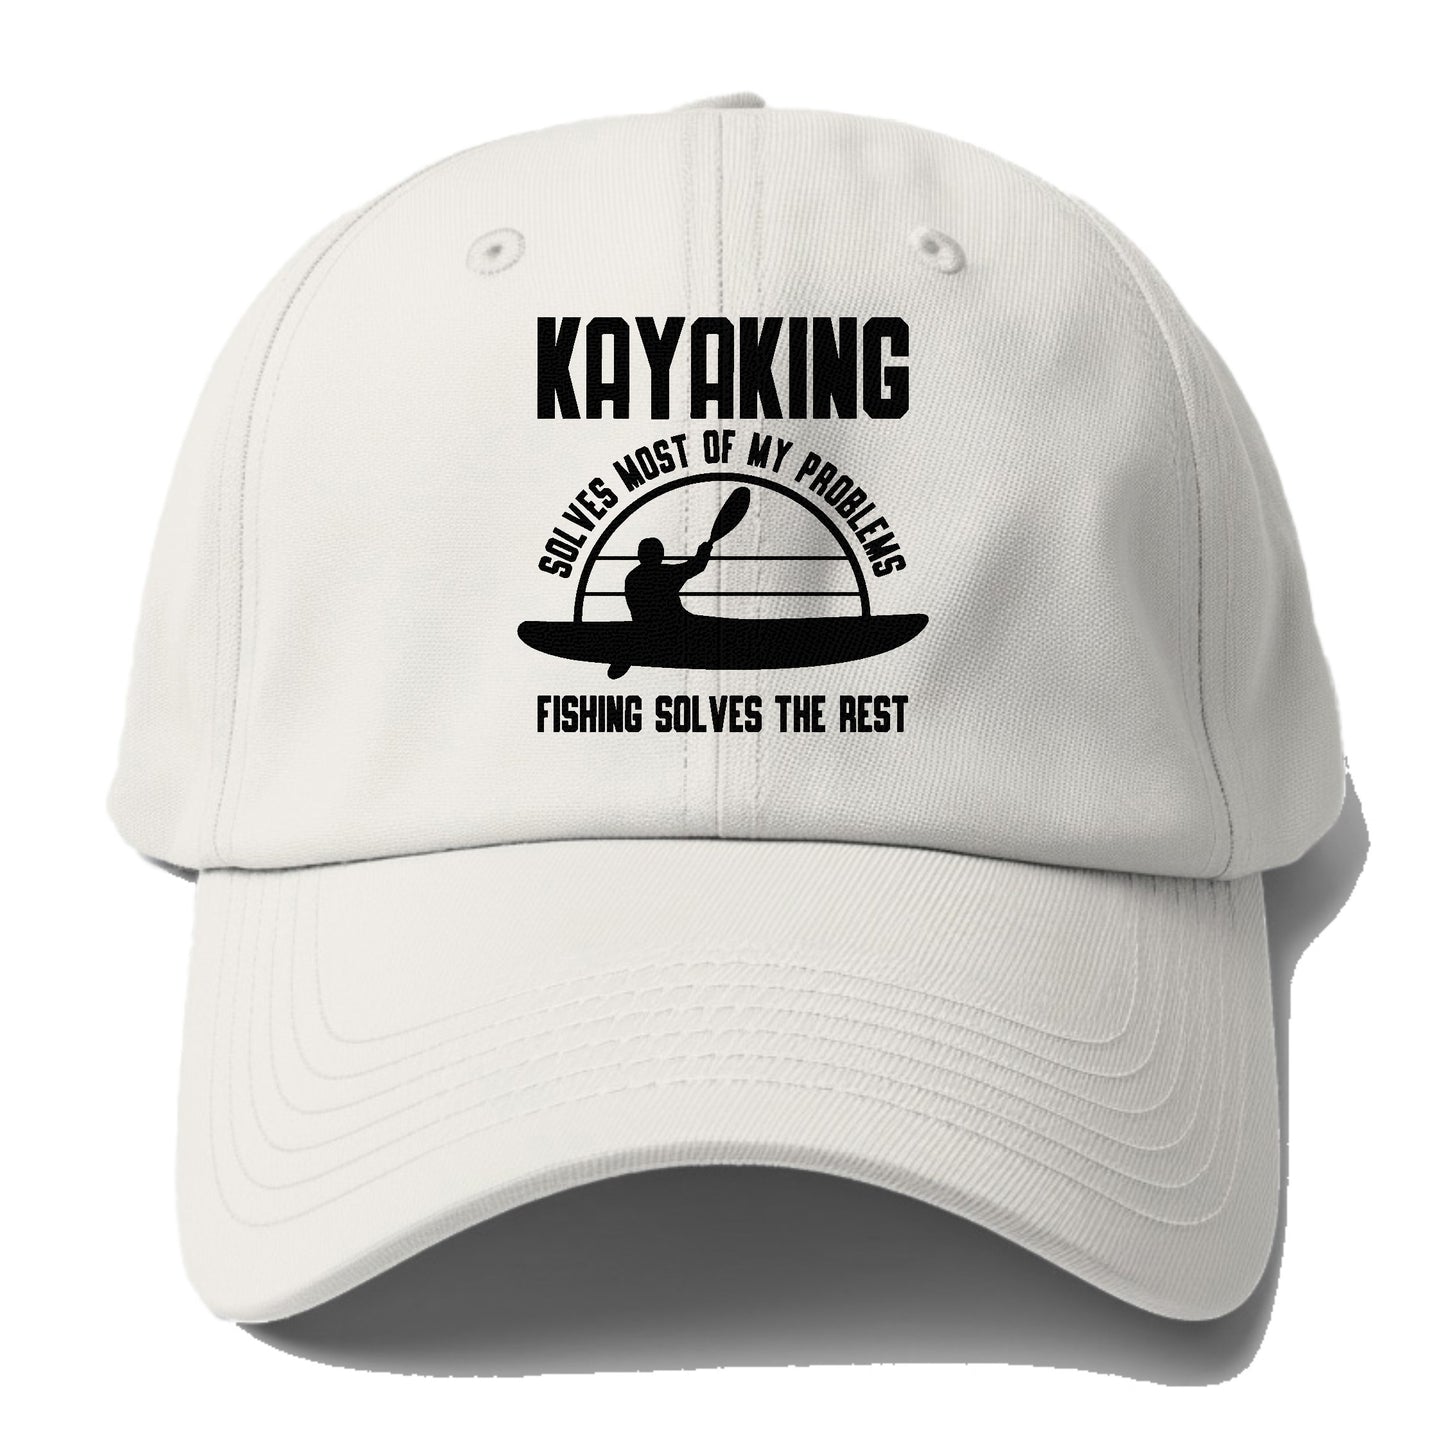 kayaking solves most of my problems, fishing solves the rest Hat